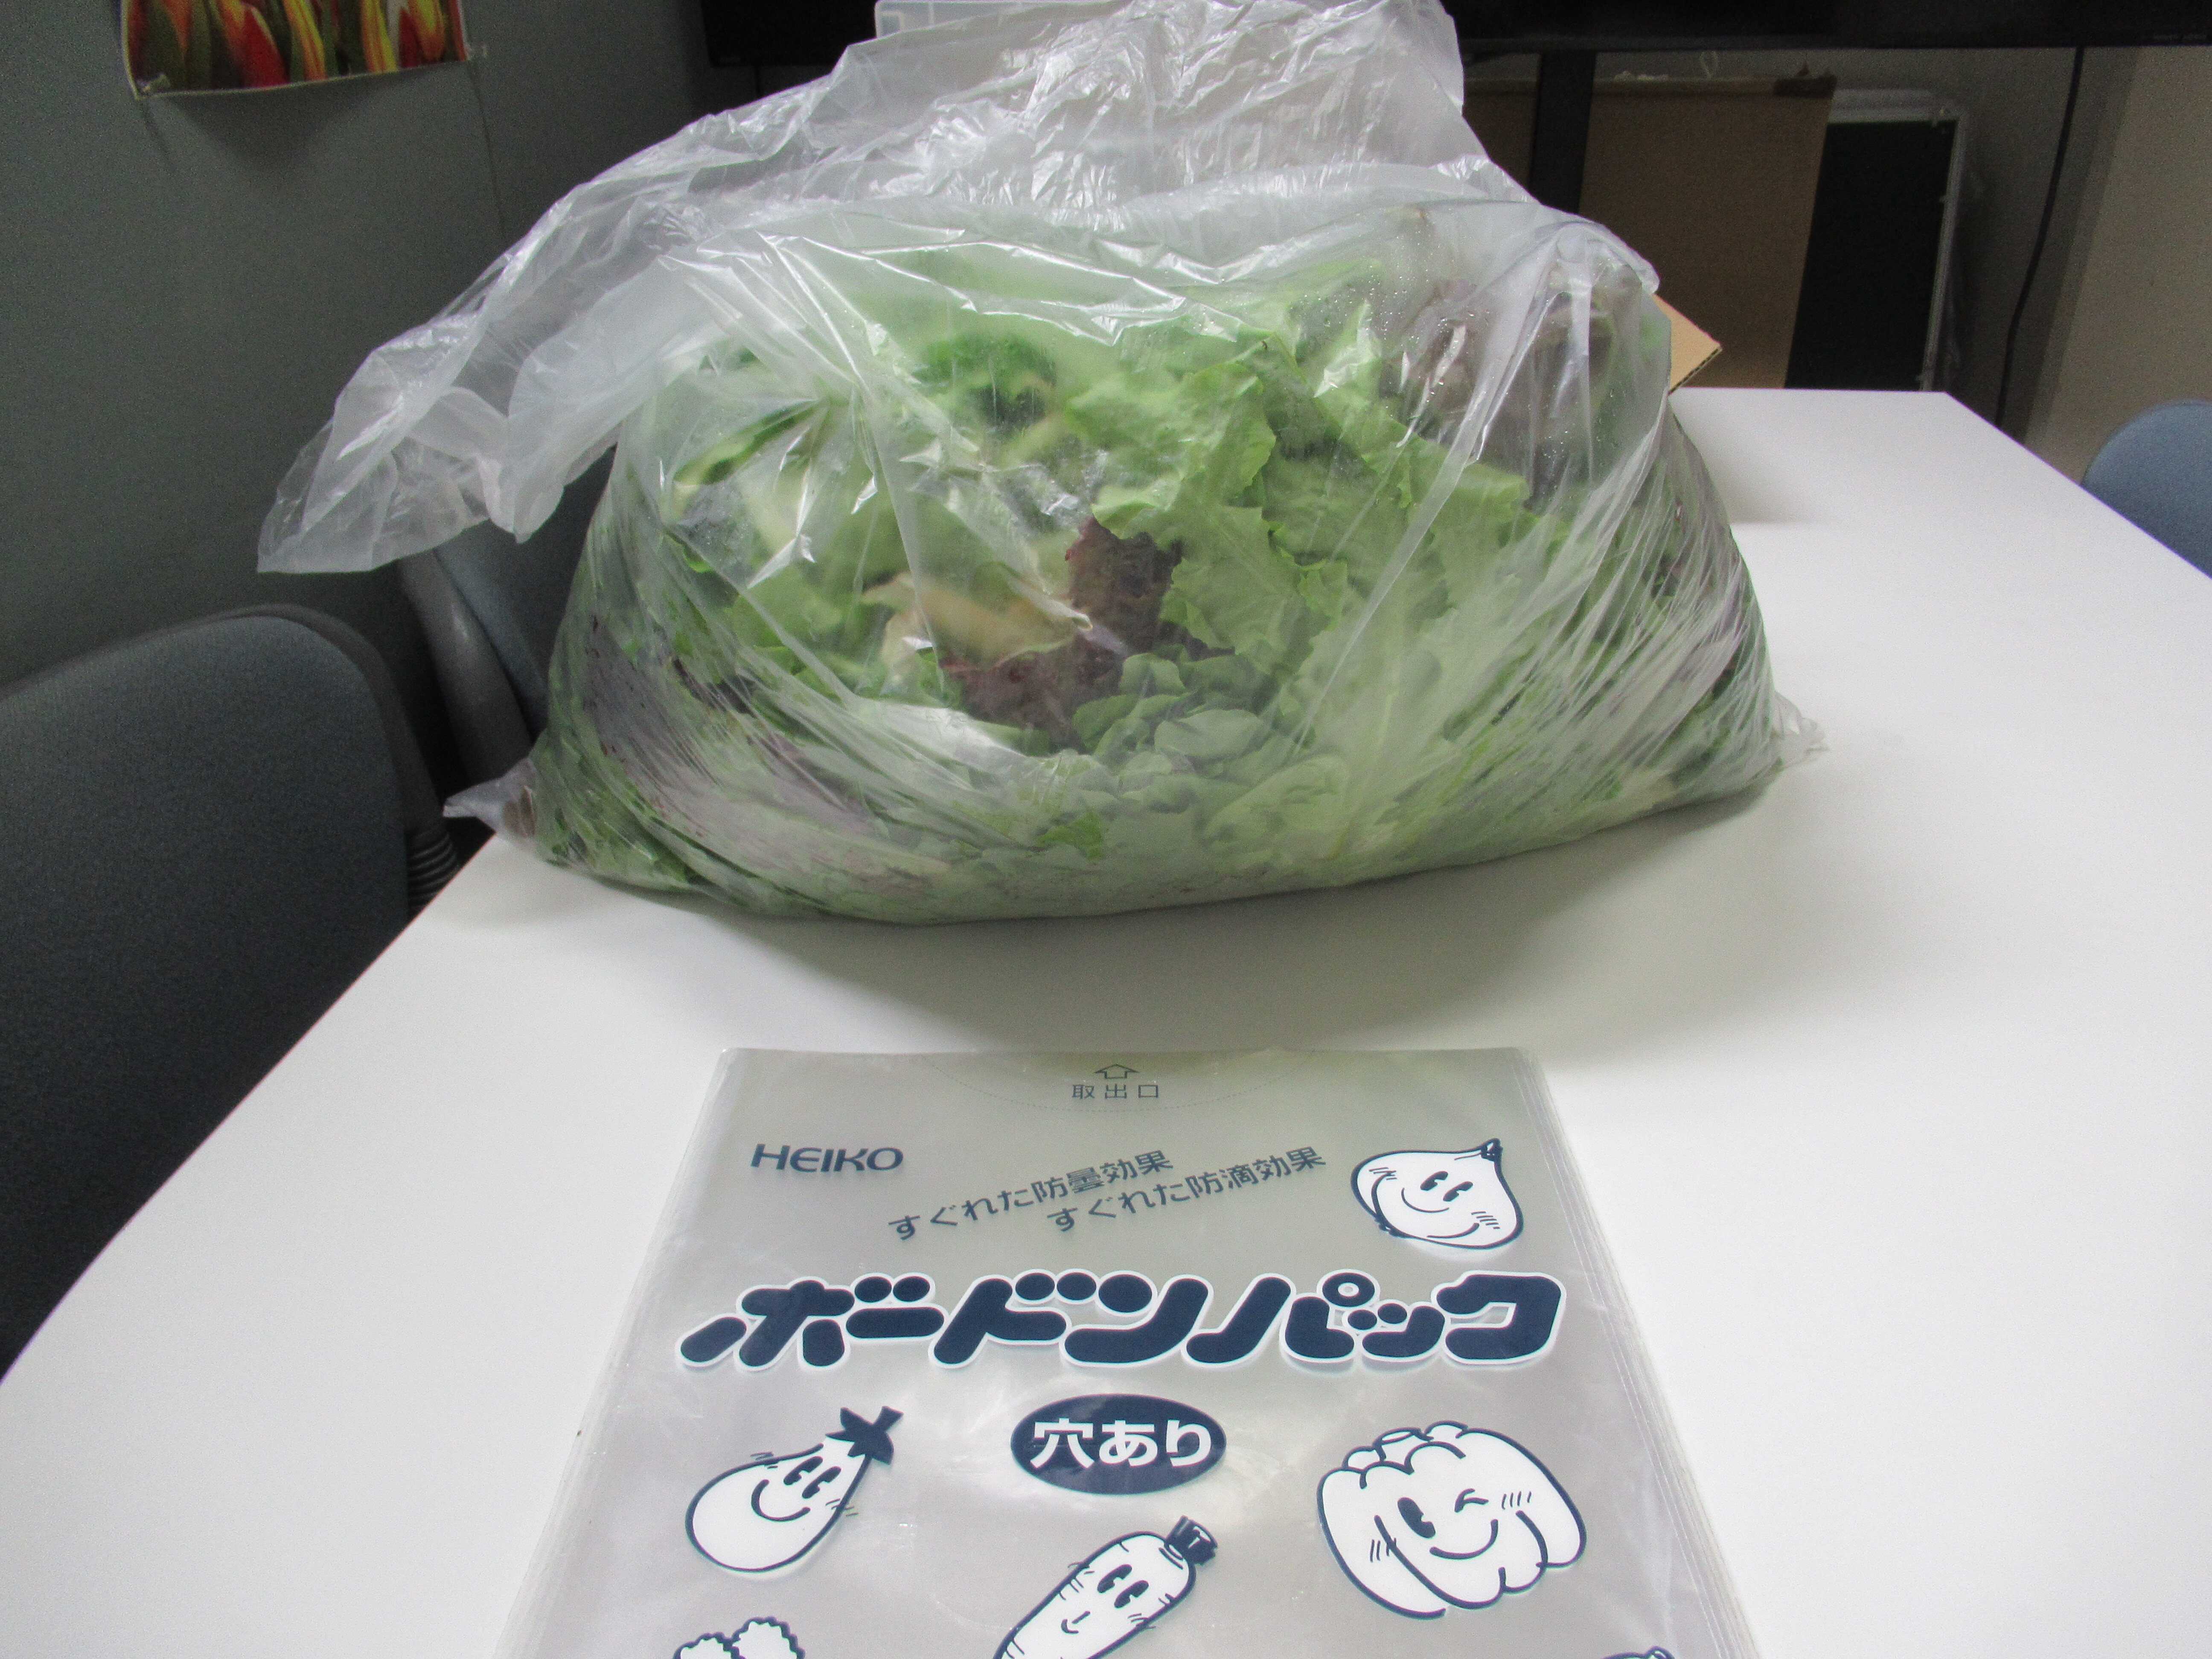 MS. Takahashi donated vegetables(Leaf Lettuce) to the international students